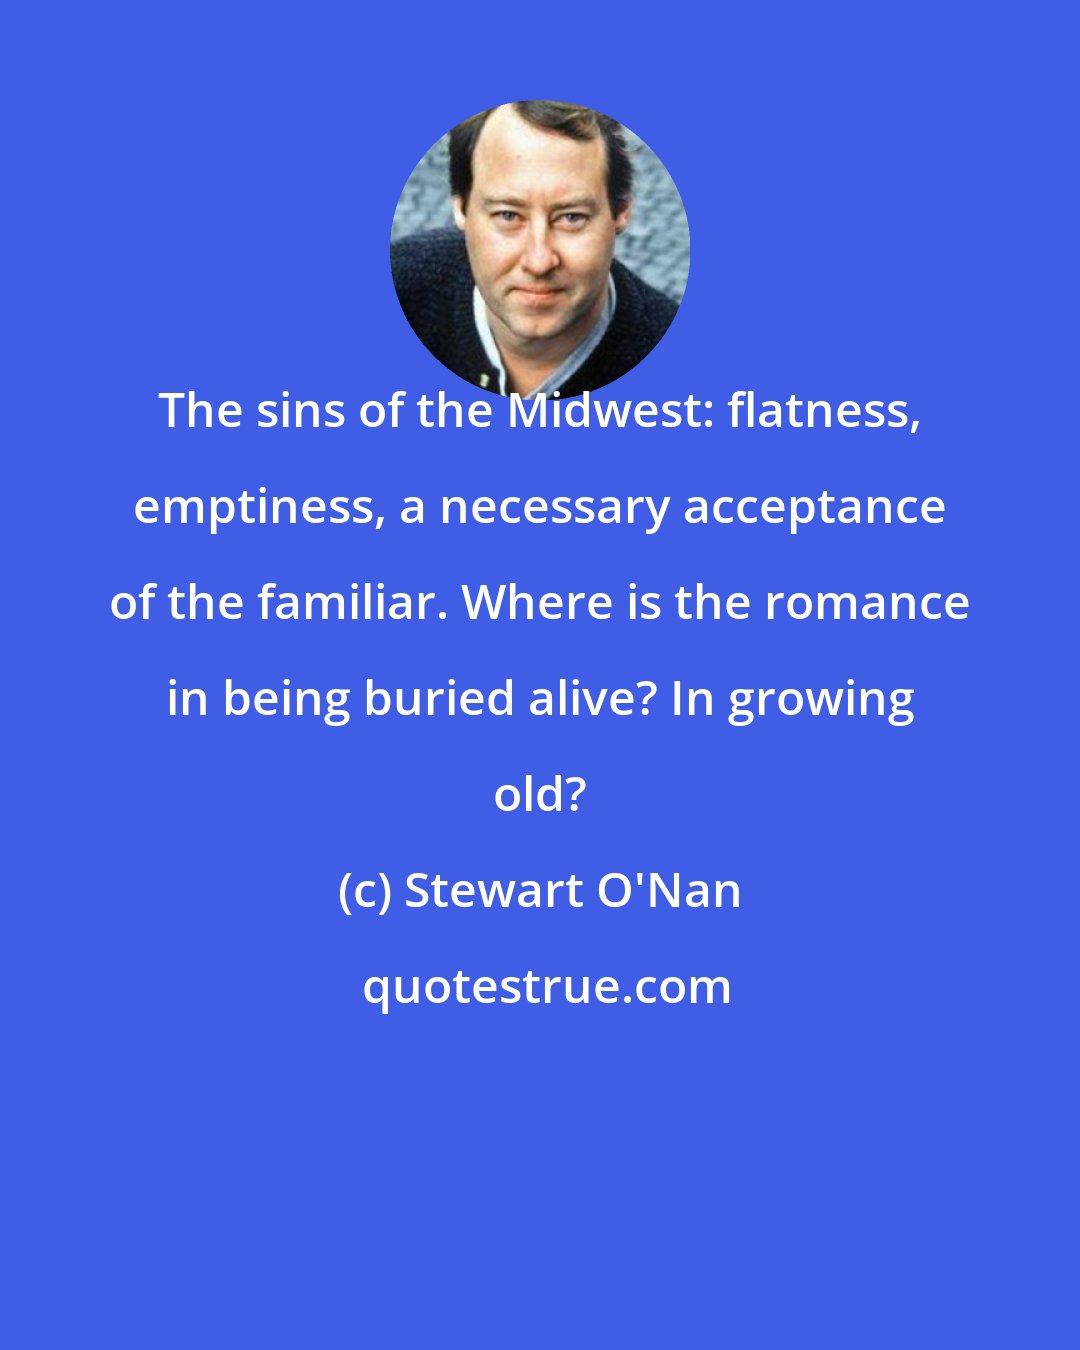 Stewart O'Nan: The sins of the Midwest: flatness, emptiness, a necessary acceptance of the familiar. Where is the romance in being buried alive? In growing old?